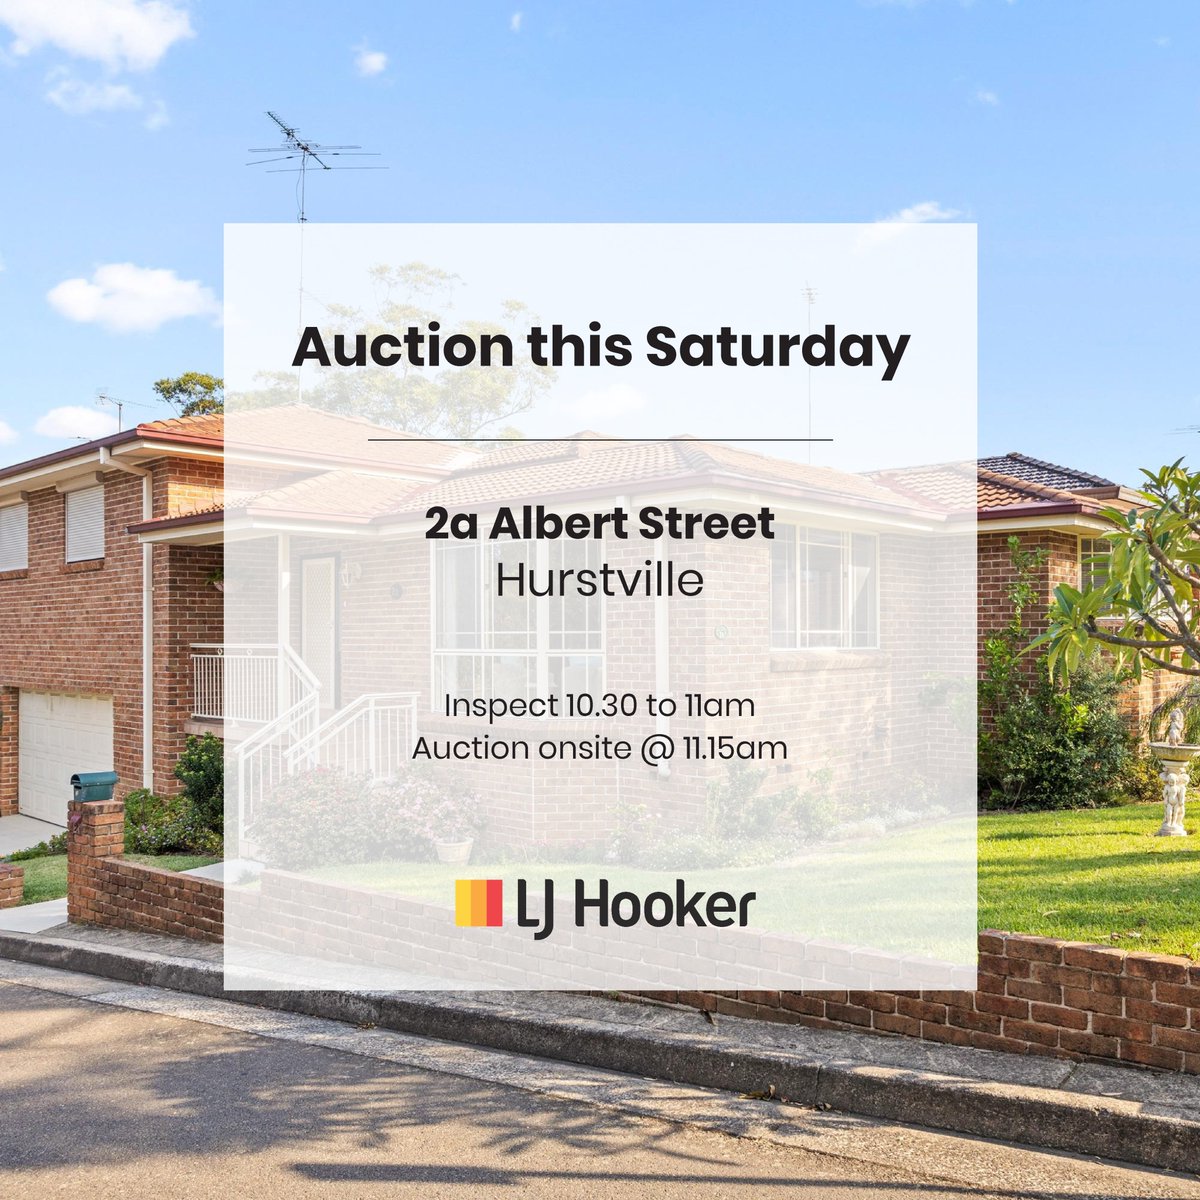 AUCTION THIS SATURDAY
Immaculate 3 bedroom duplex
Auction onsite at 11.15am
Call Louie Jovcevski on 0418 449 006 or Travis Jovcevski on 0421 923 662
LJ Hooker Hurstville

#LJHookerHurstville #YouKnowWhenyouKnow #Hurstville #LouieJovcevski  #travisjovcevski #auctionthissaturday